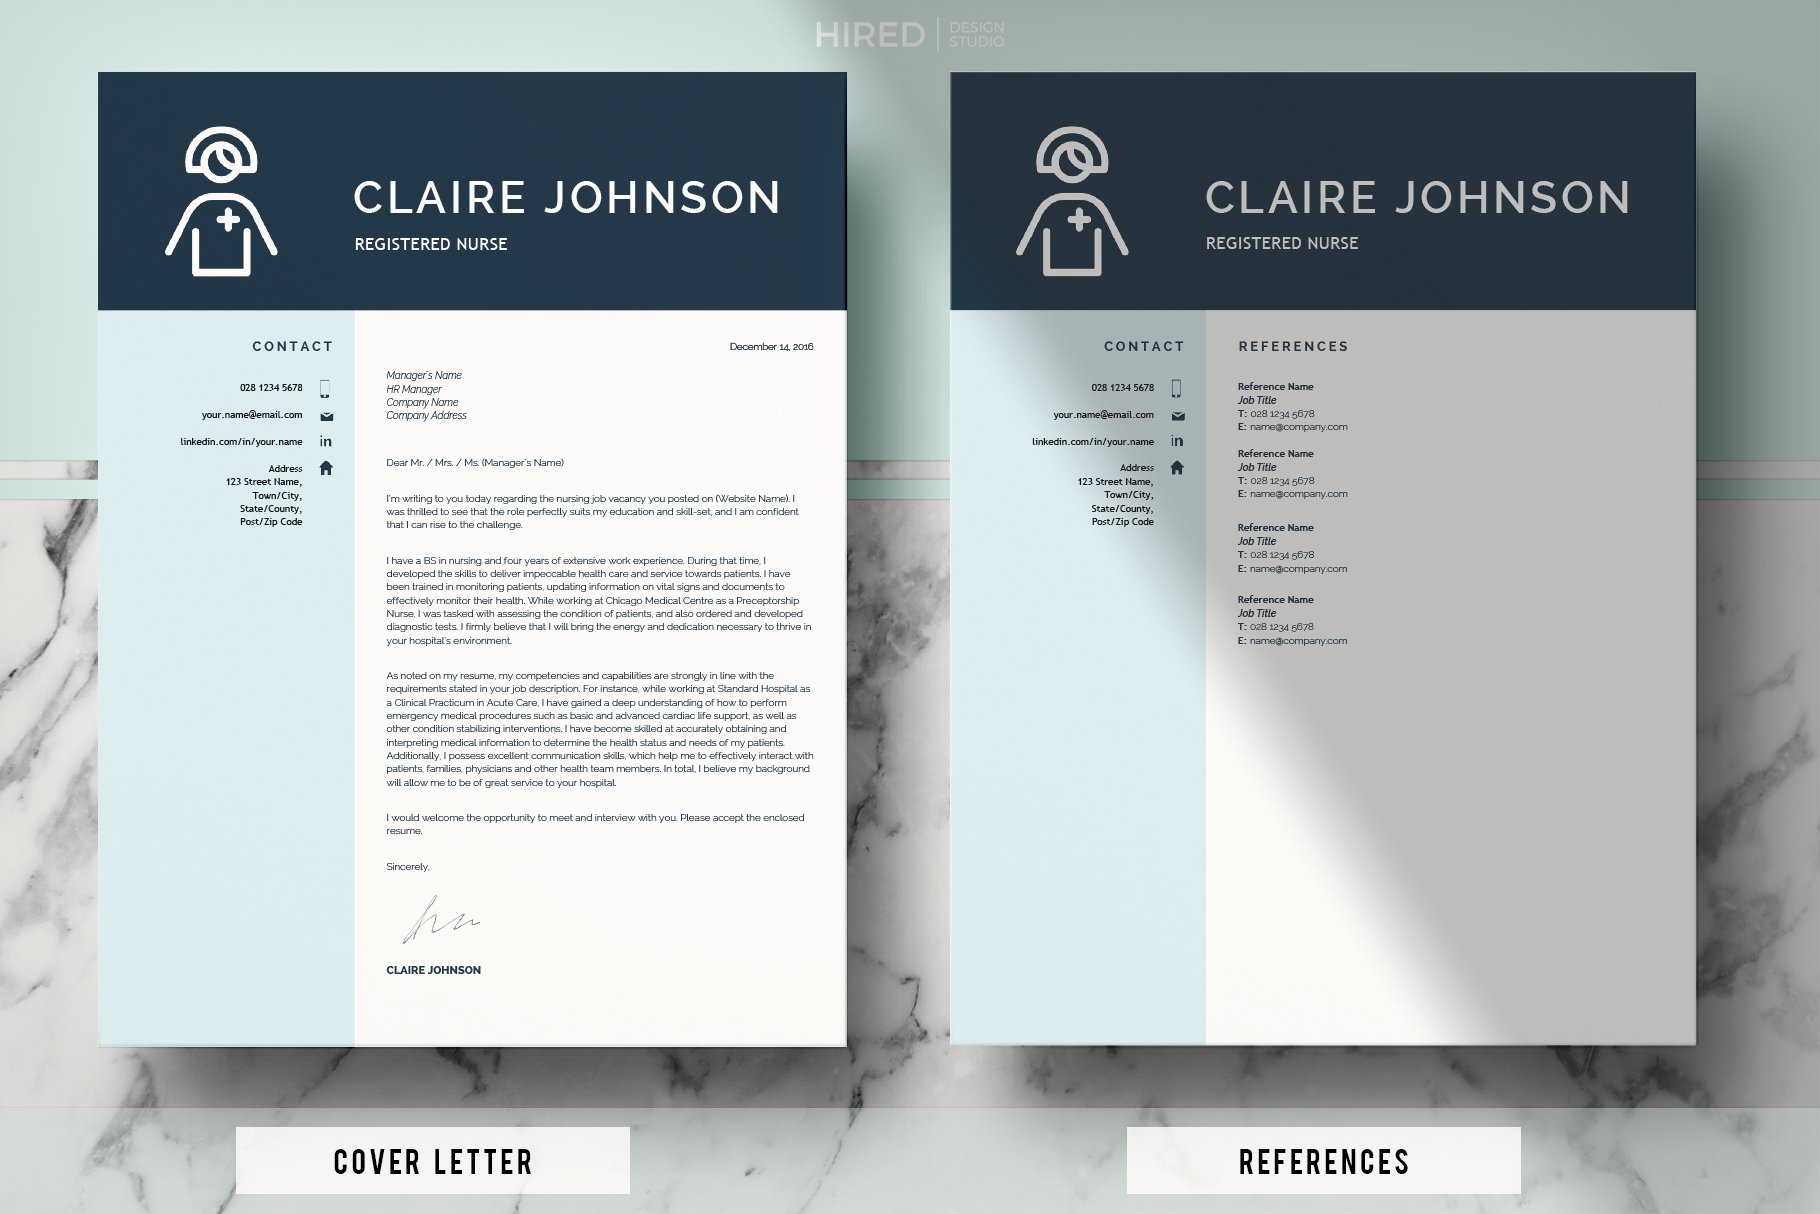 Two resume templates on a marble background.